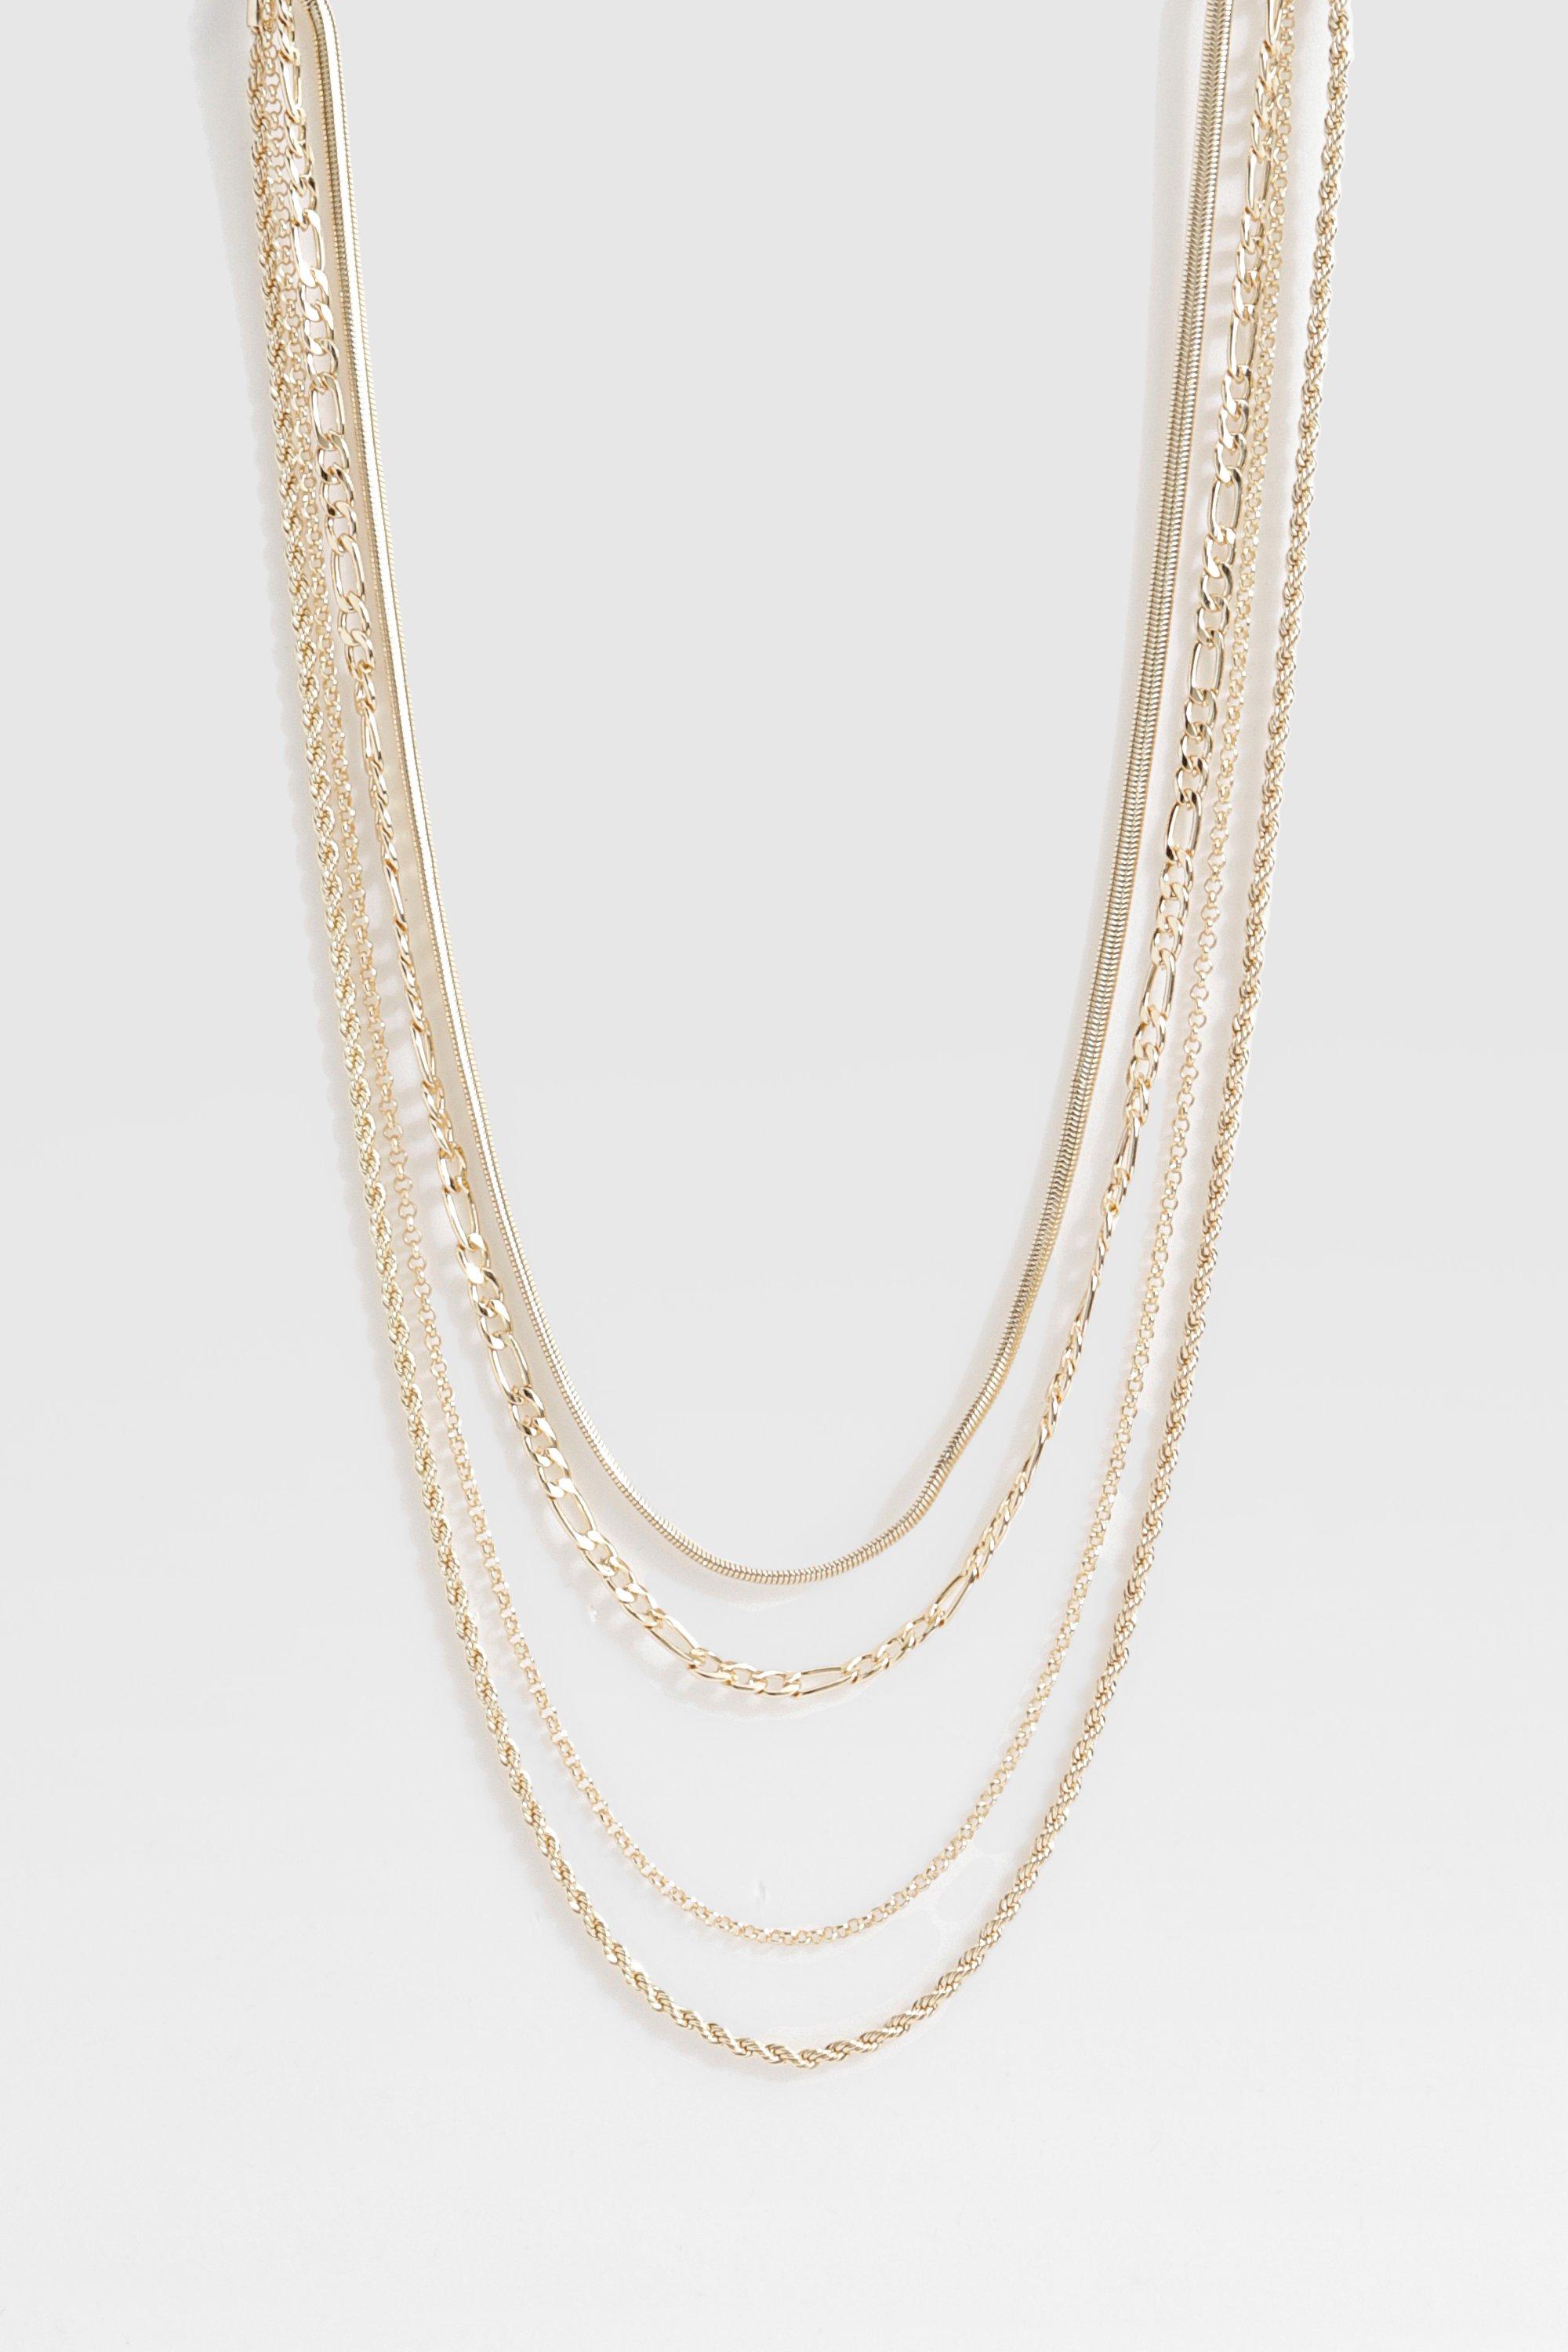 Image of Layered Snake Chain Necklaces, Metallics